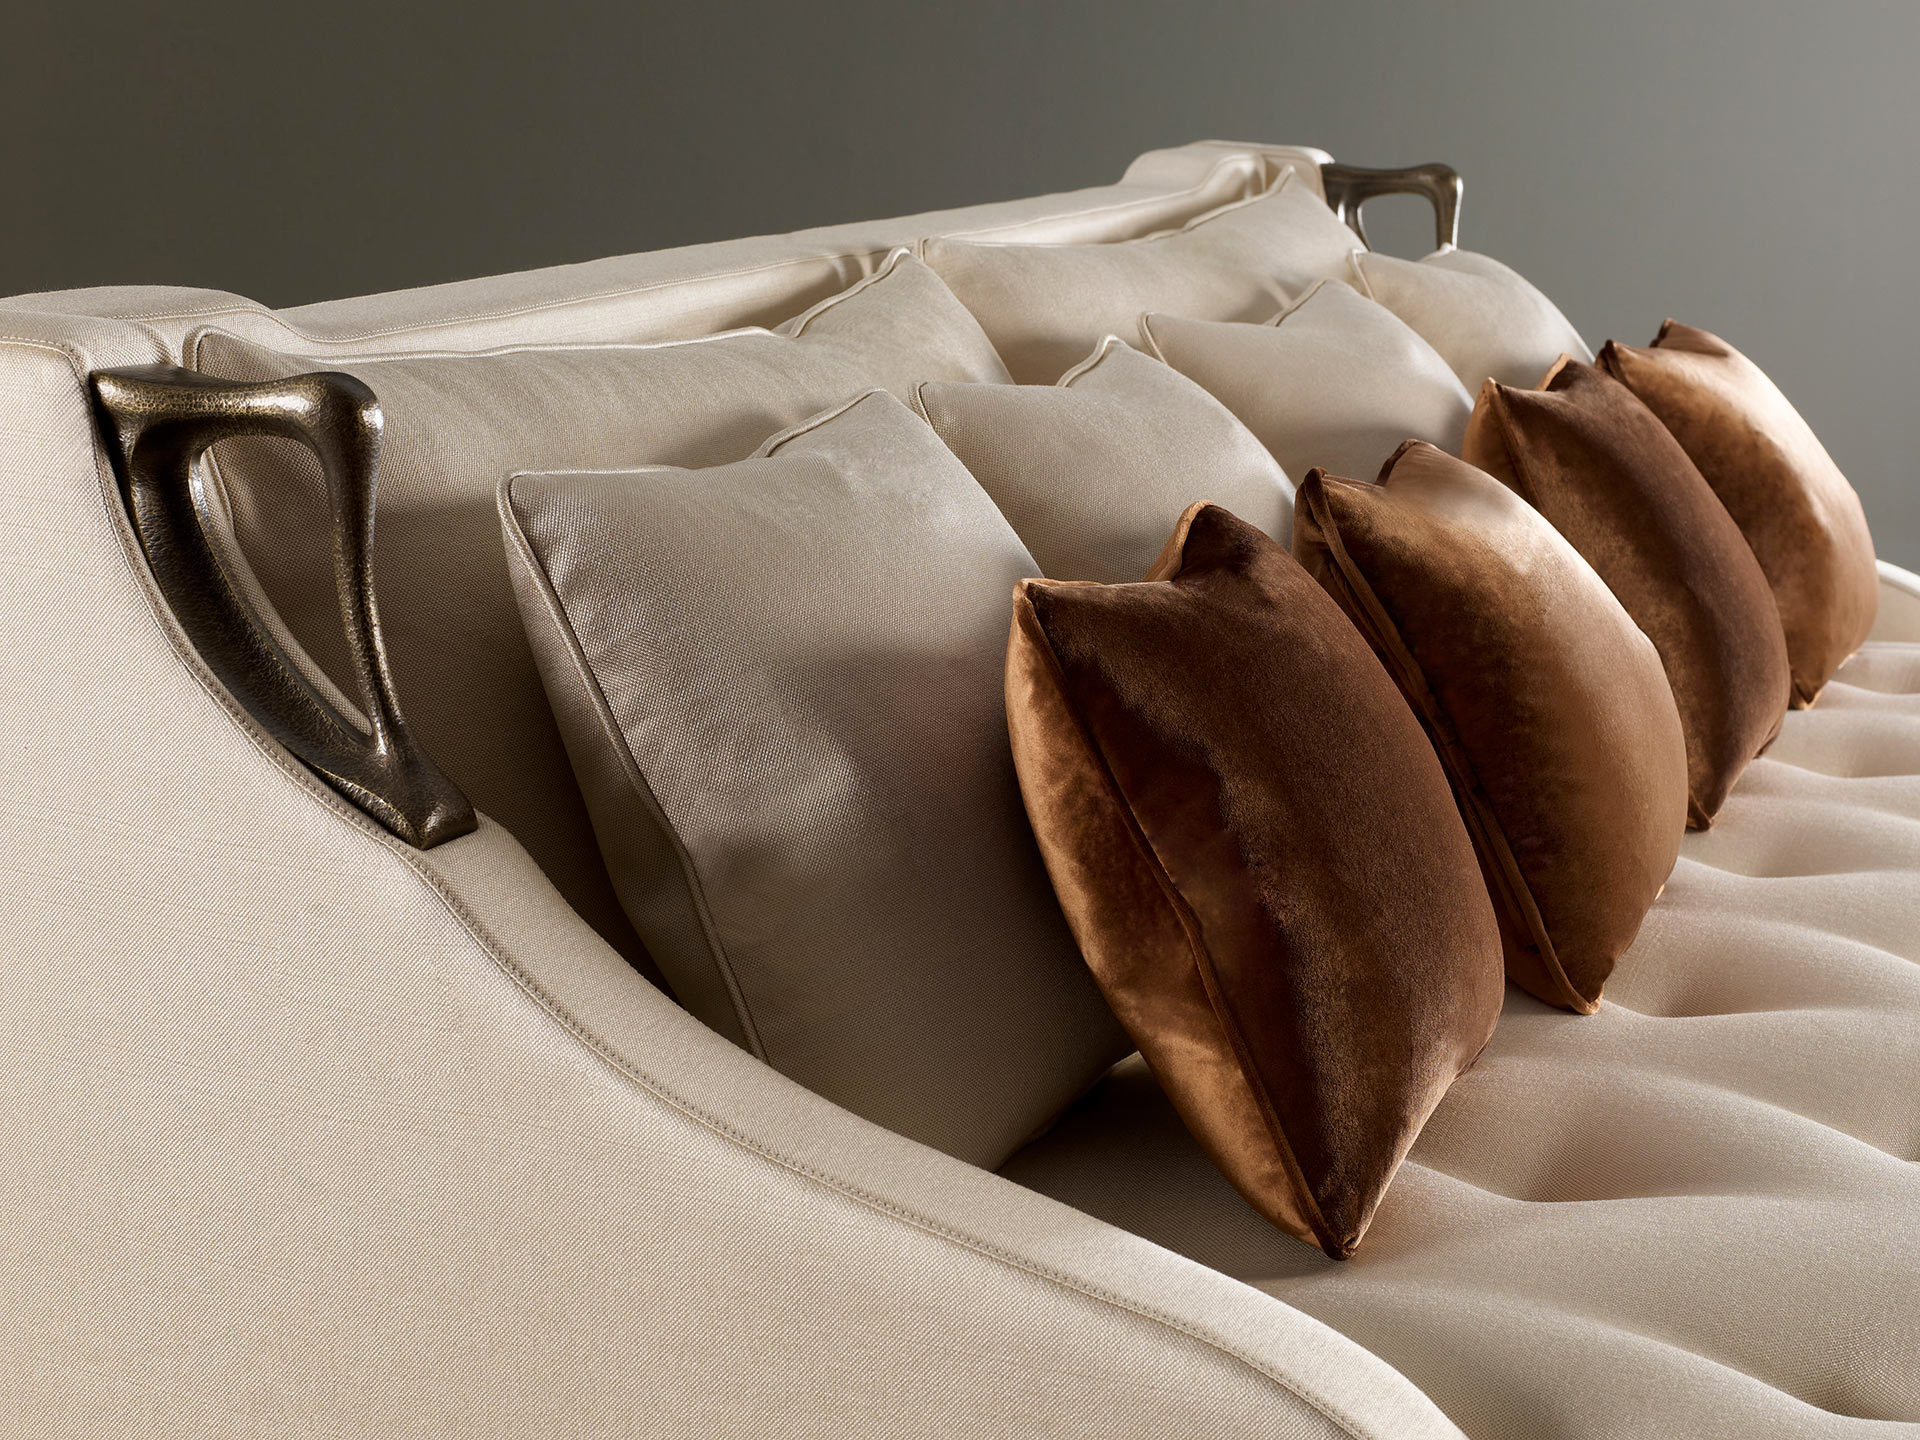 Detail of Albert, a wooden sofa covered in fabric with two bronze handles on the sides, from Promemoria's catalogue | Promemoria